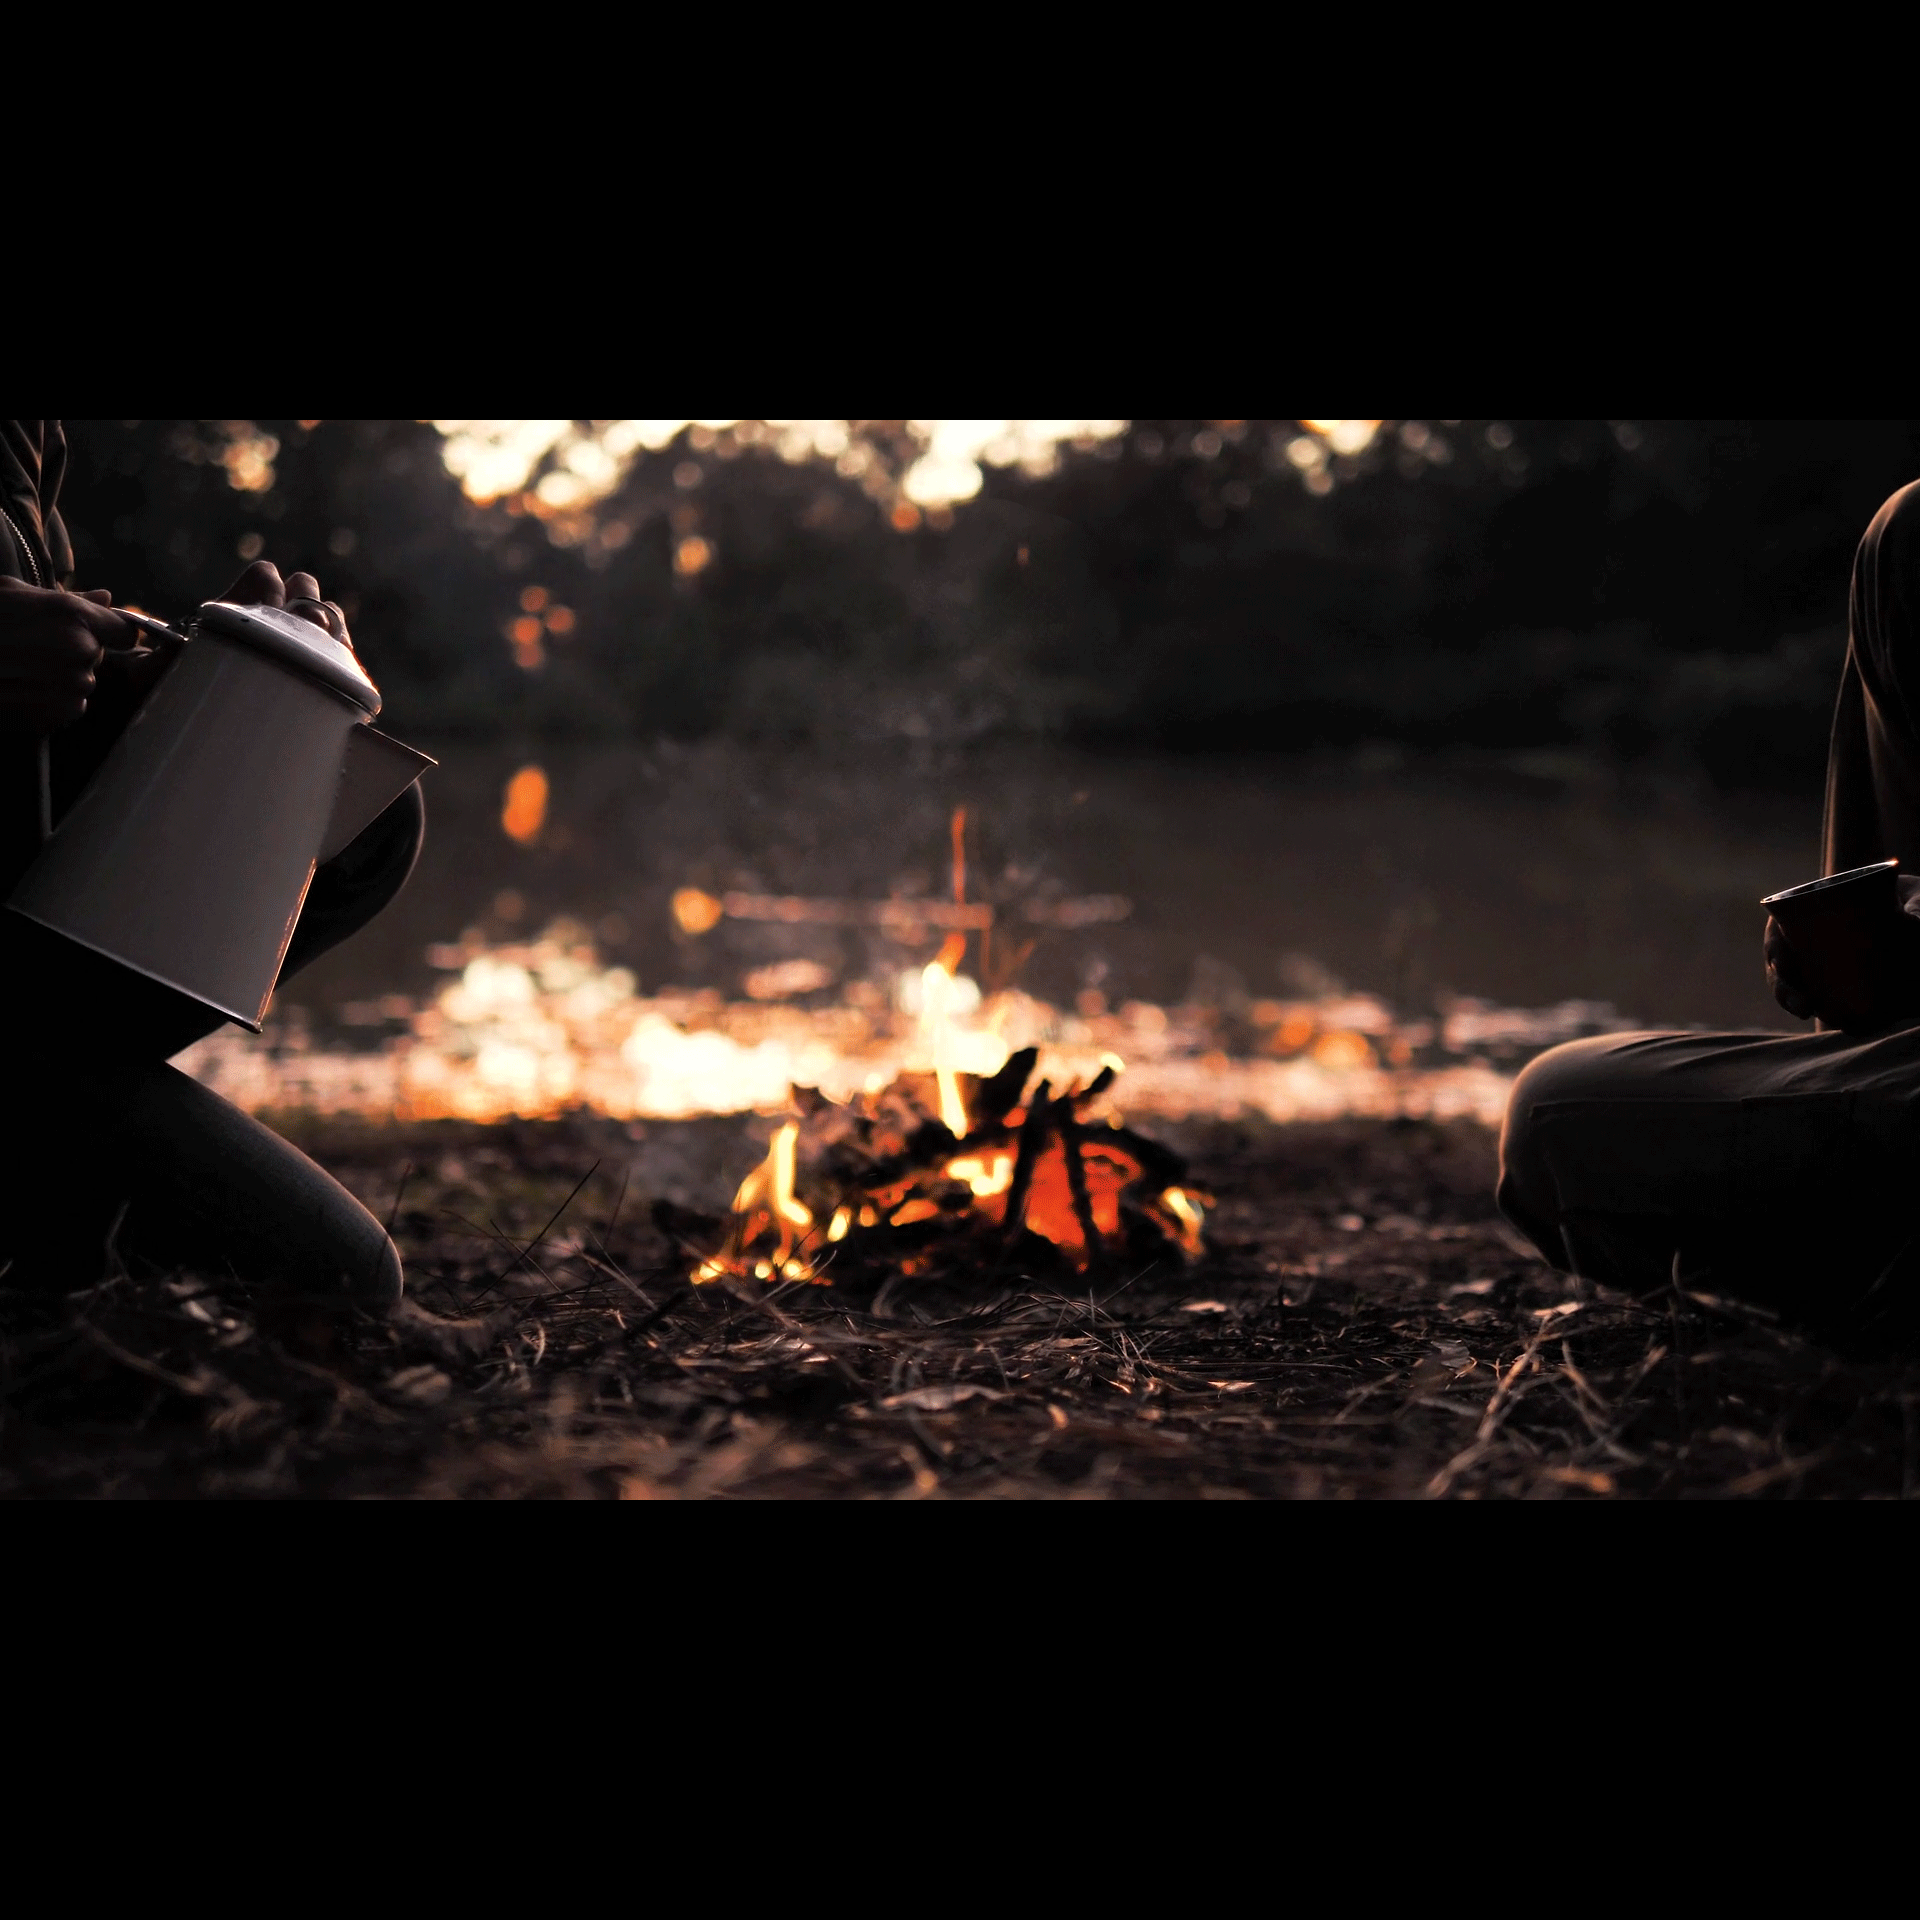 A Cinemagraph of a campfire.